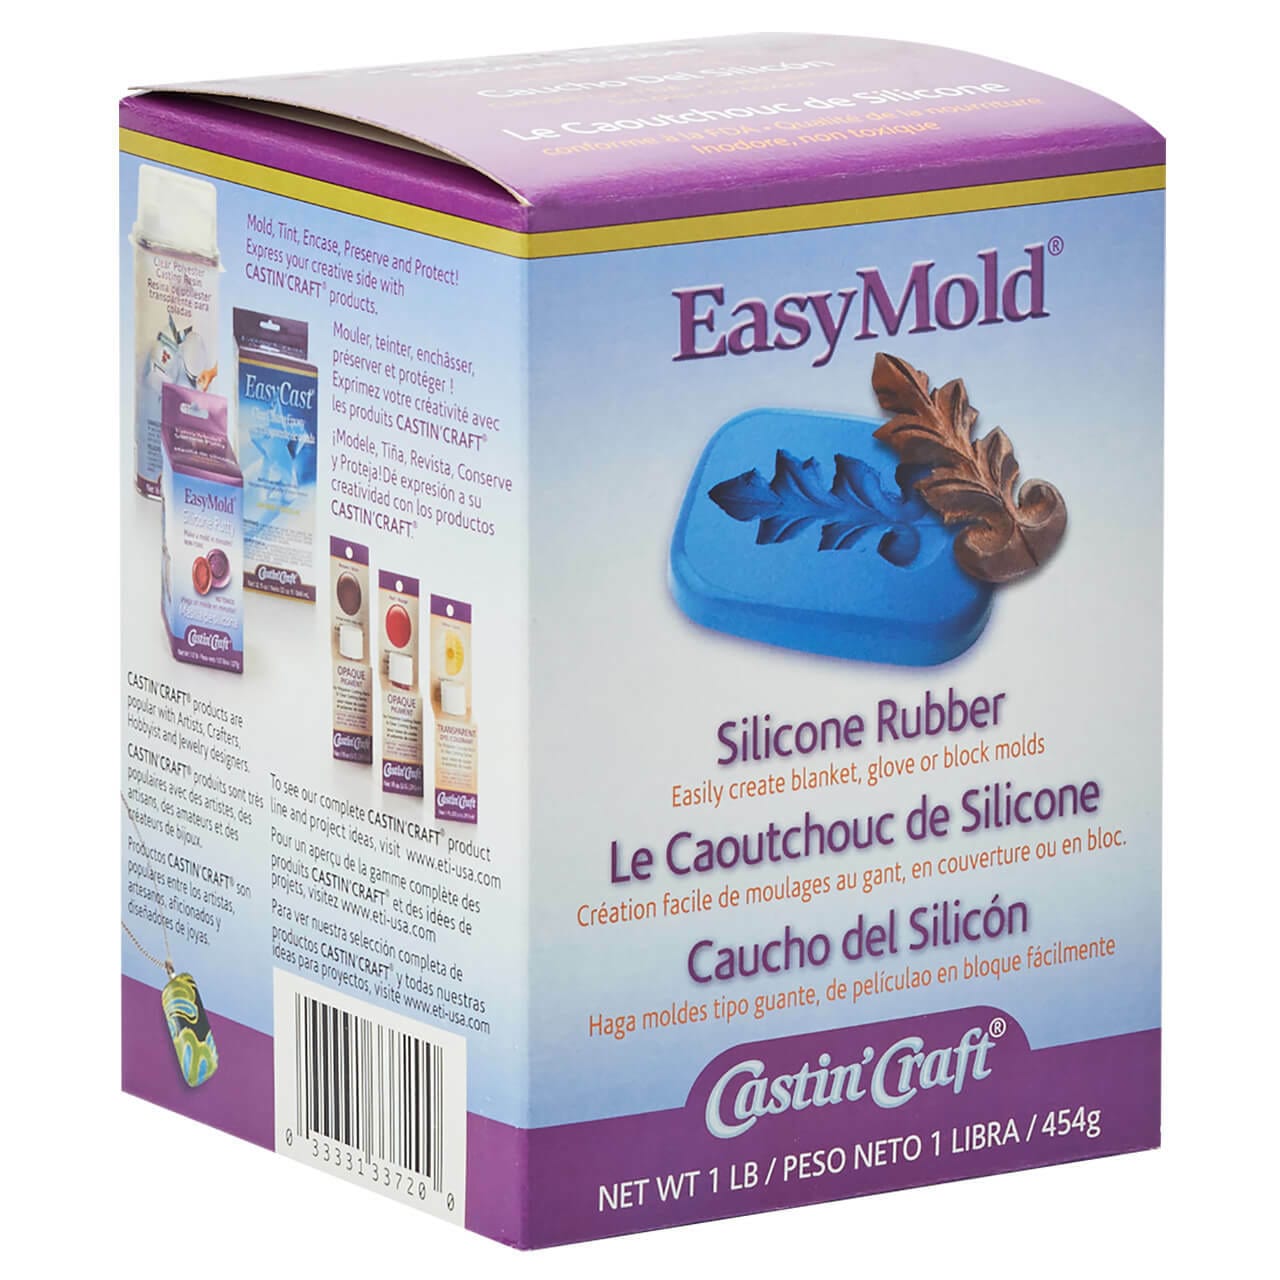 EasyMold Silicone .5lb Putty